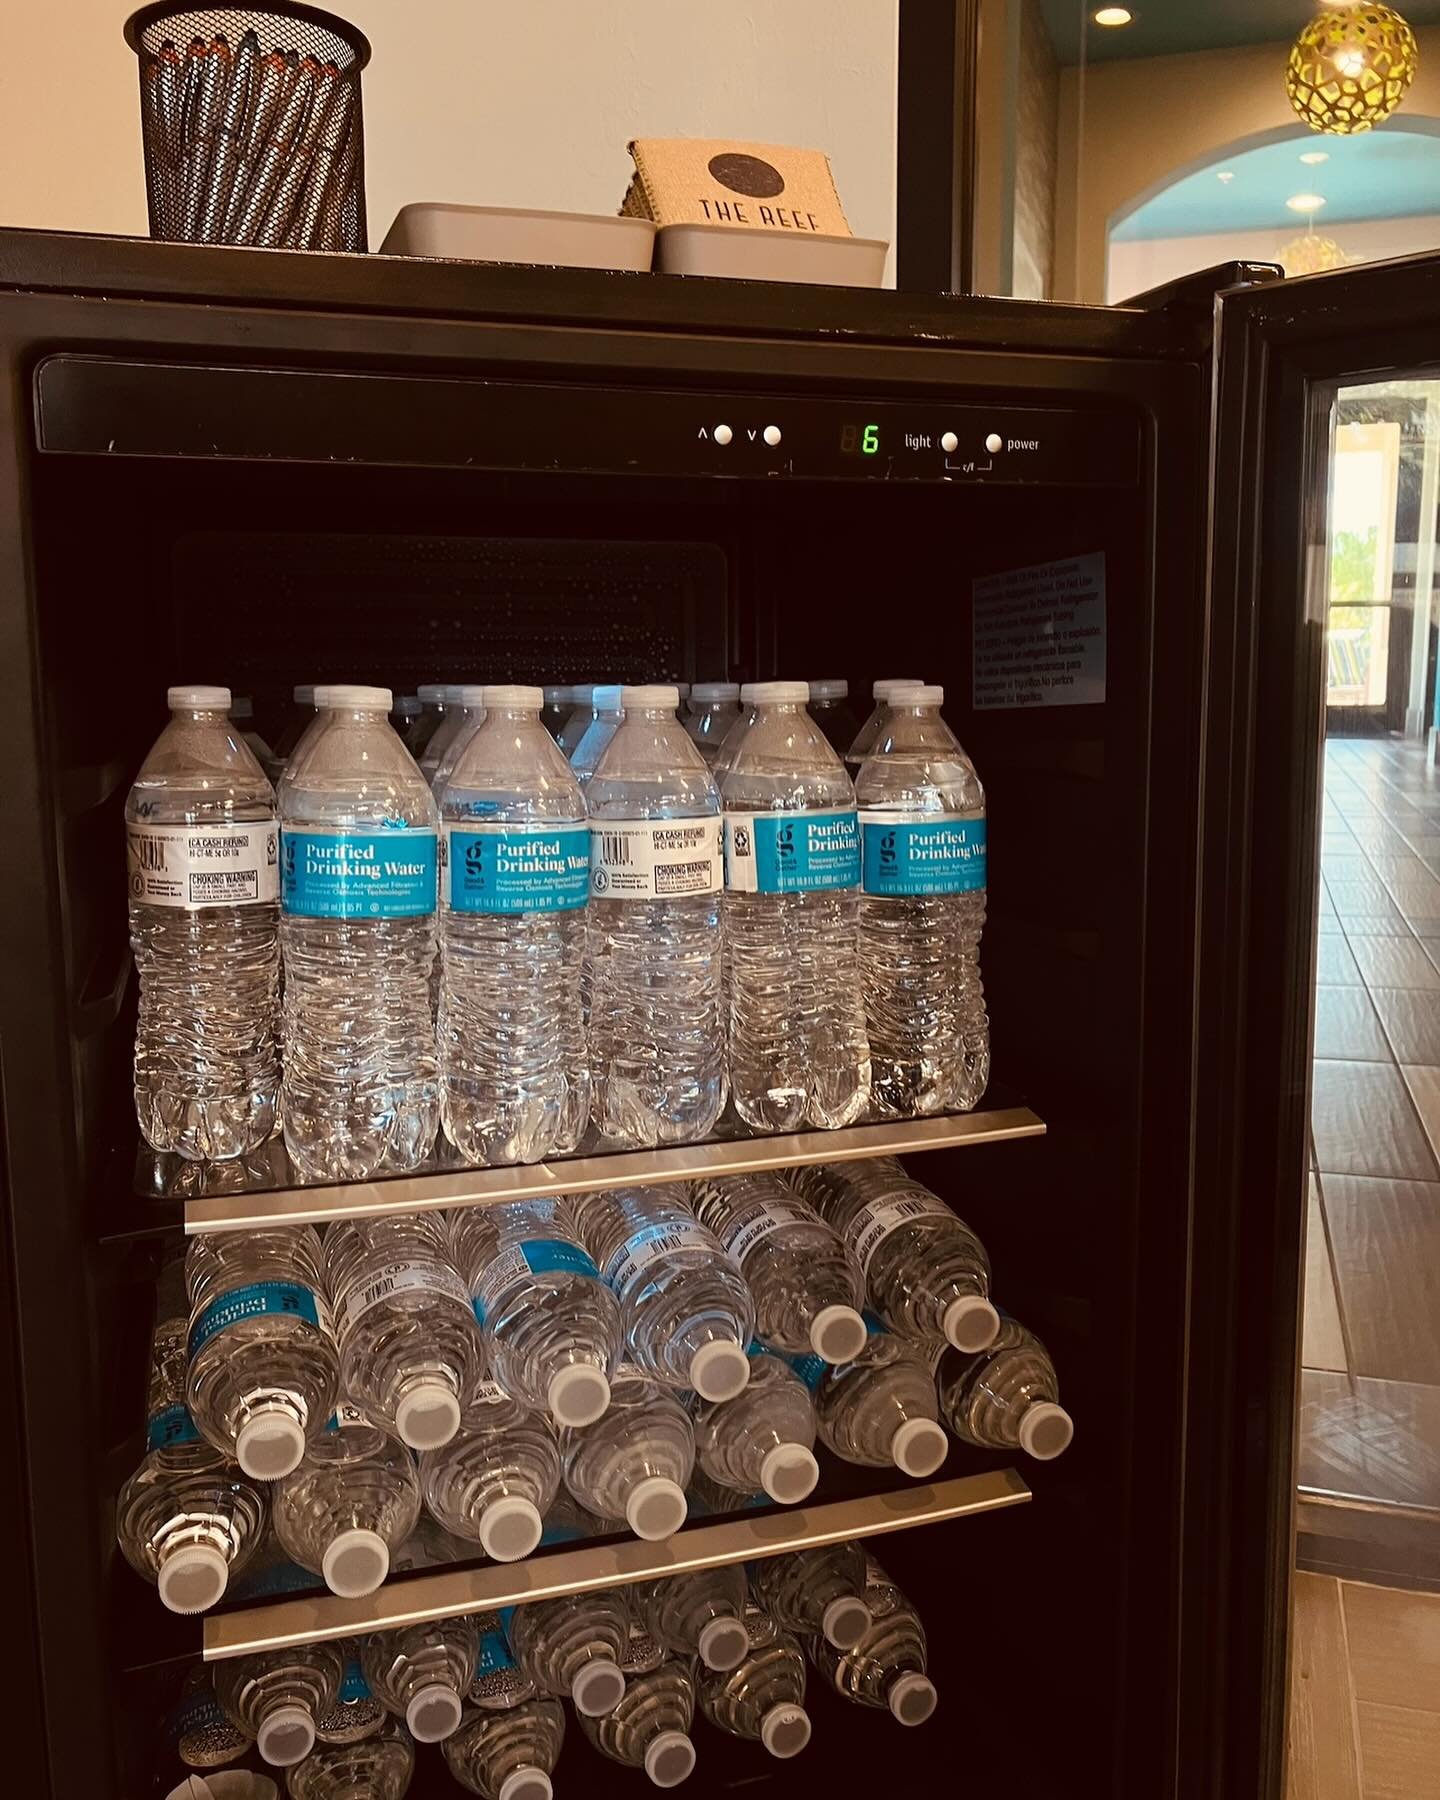 Finals got you parched? 💦 Make sure to stop by the Leasing Office for a water on us! 
&bull;
&bull;
#livethereef #finals #fgcu #renew #refresh #water #bottle #healthy #leasing #office